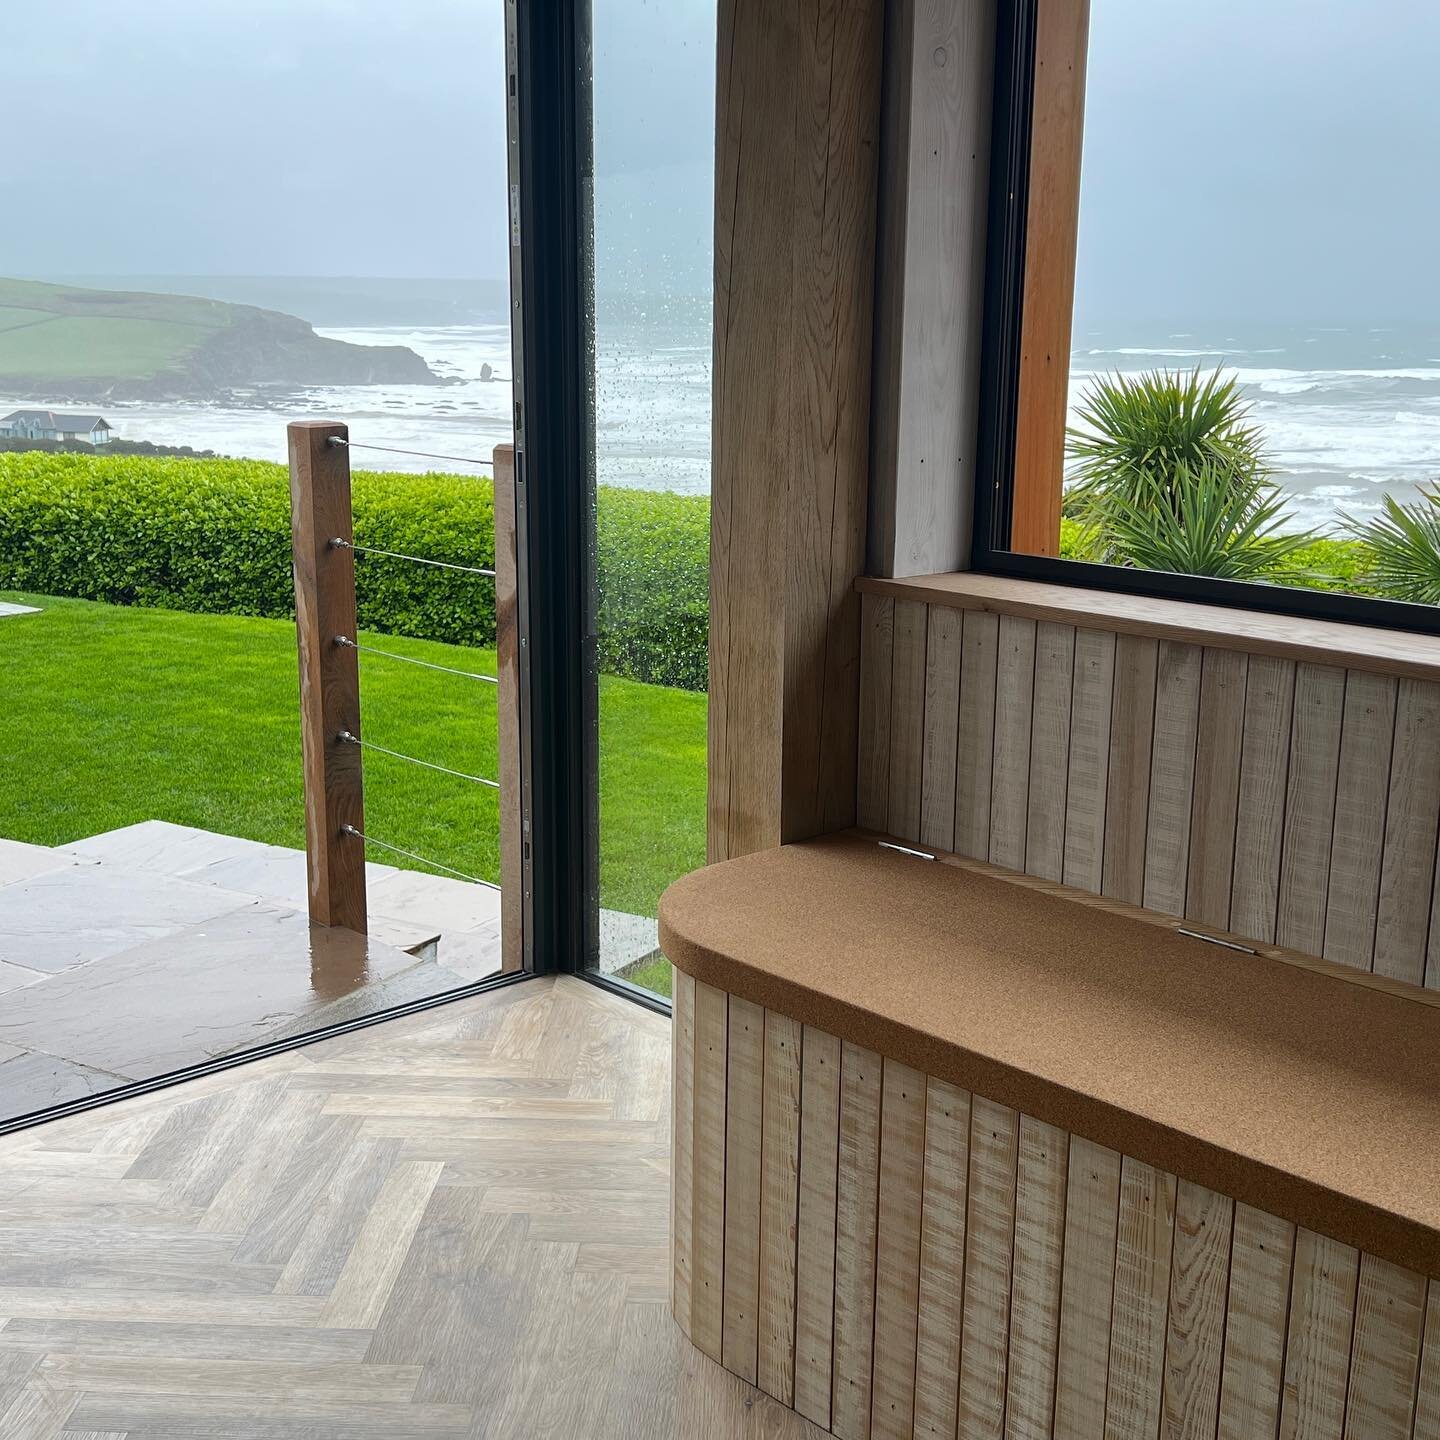 Wild seas this morning - a few more snaps from our recent project perched high overlooking Bantham. 

#wildseas
#outsideinside
#insideoutside
#oakframebuilding 
#timberbuildings 
#bantham
#bigburyonsea 
#southhamsdevon